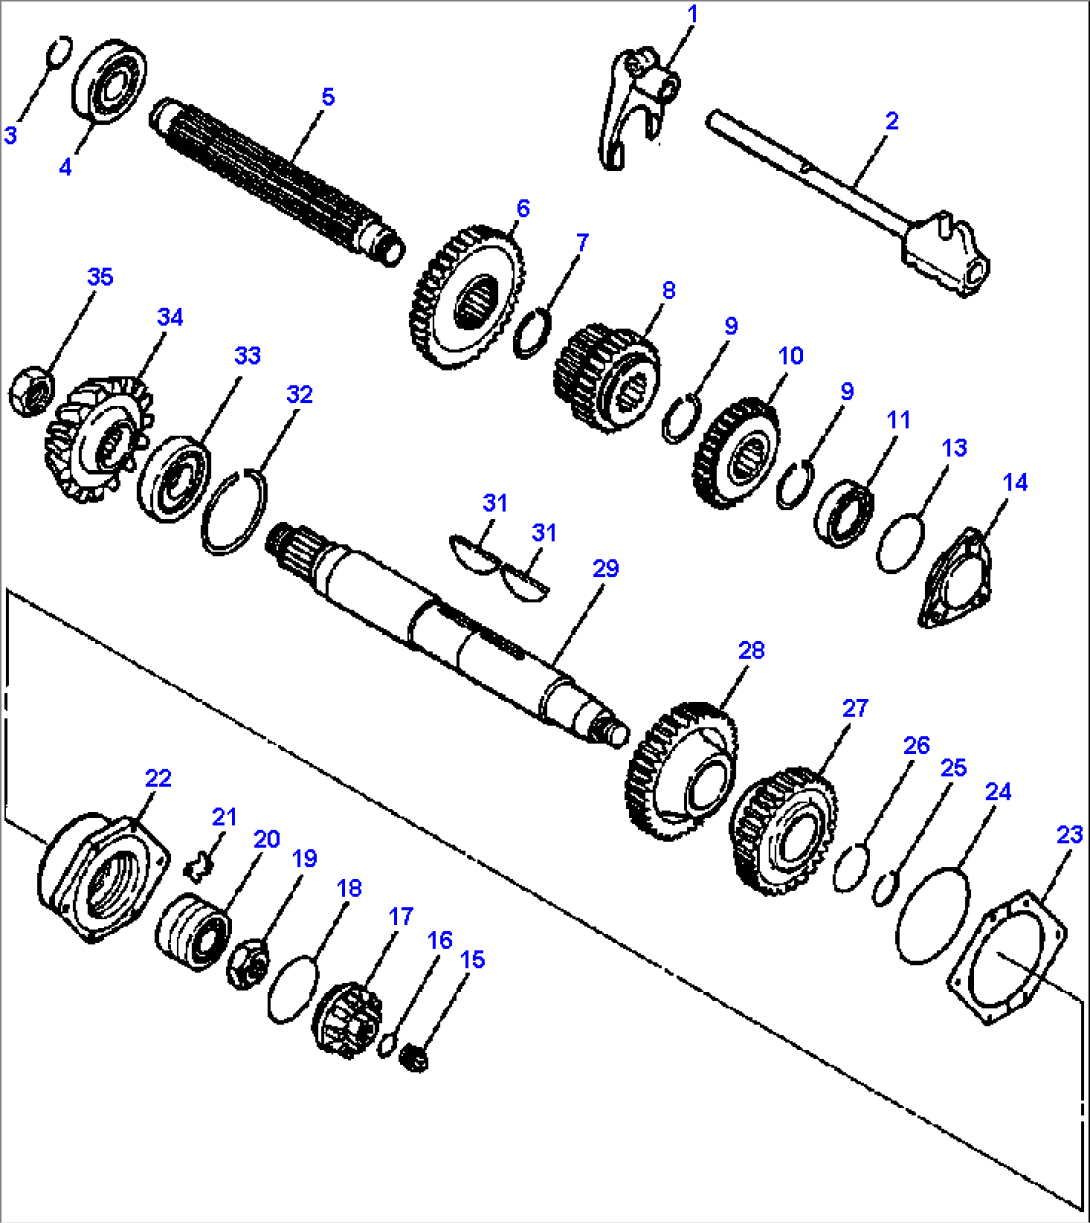 TRANSMISSION BEVEL PINION SHAFT, SPLINE SHAFT, AND RELATED PARTS